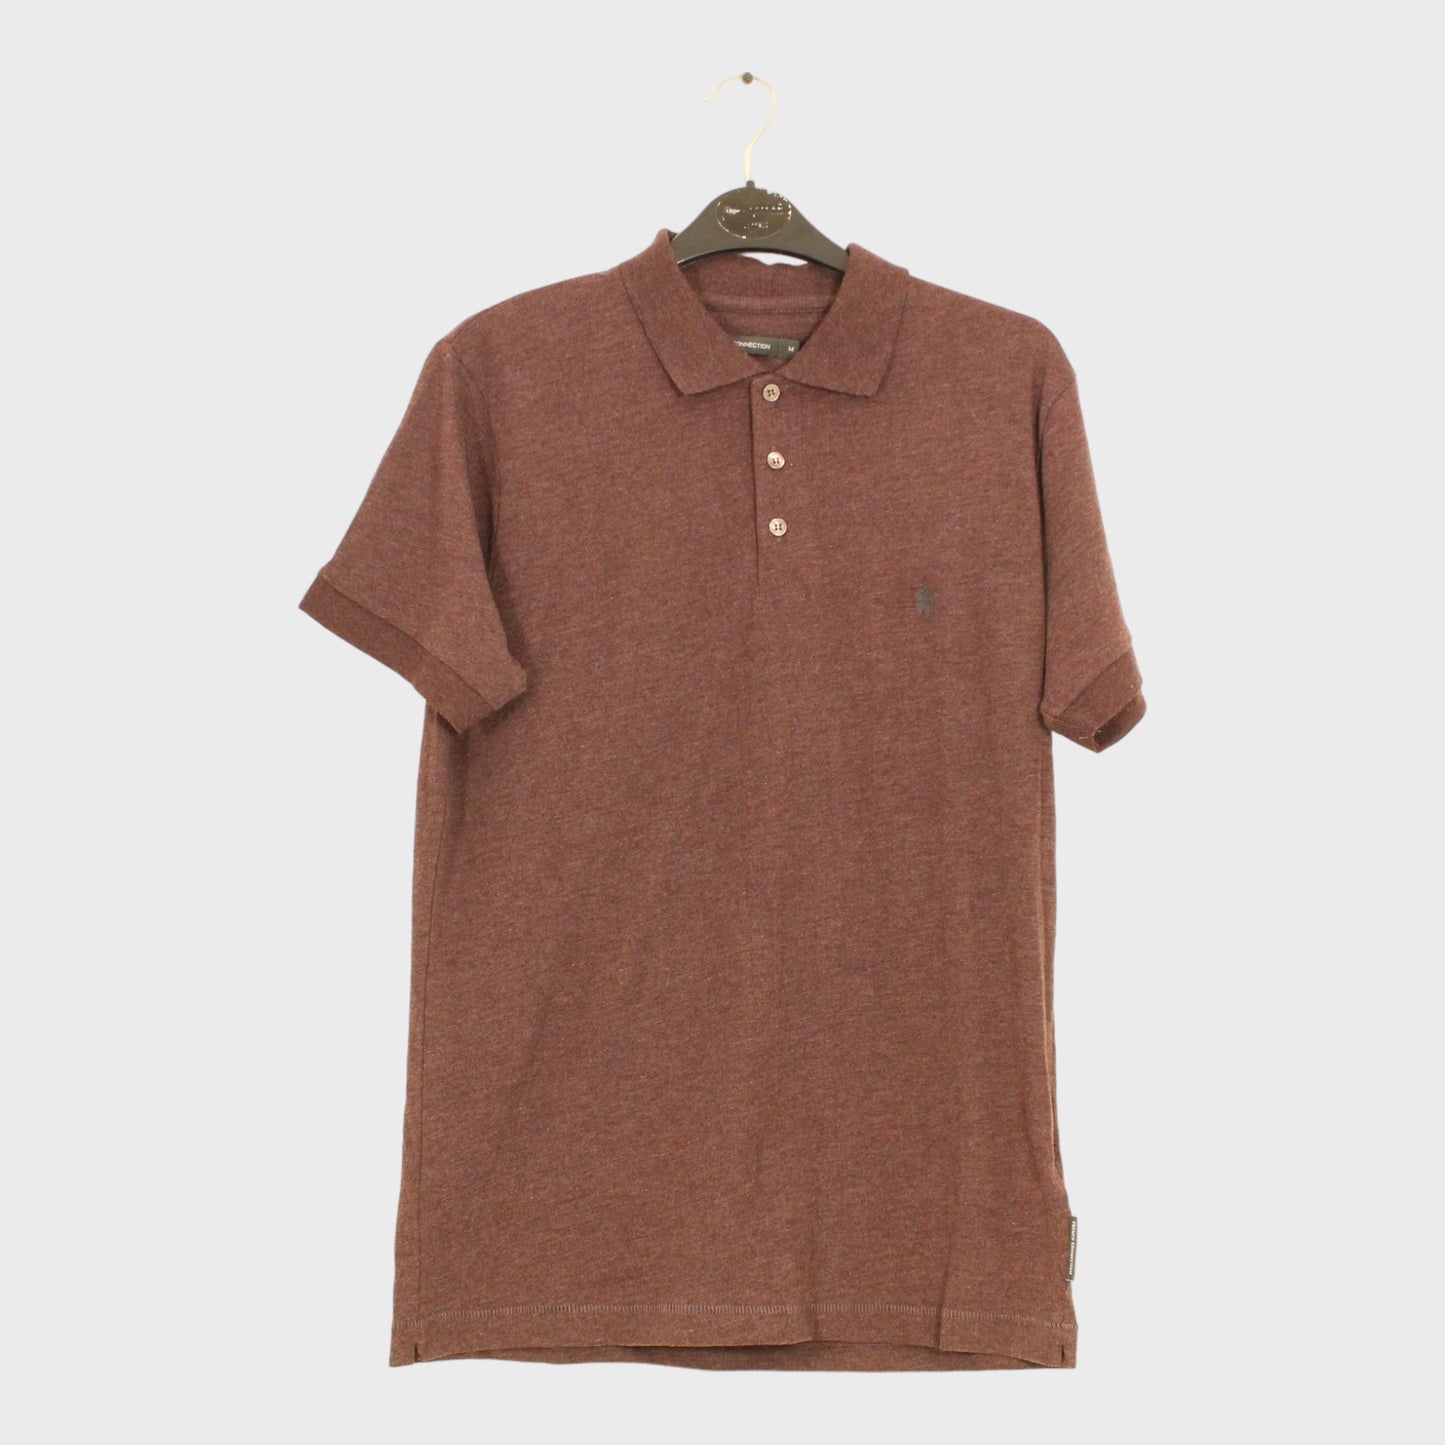 Men's French Connection Polo Shirt